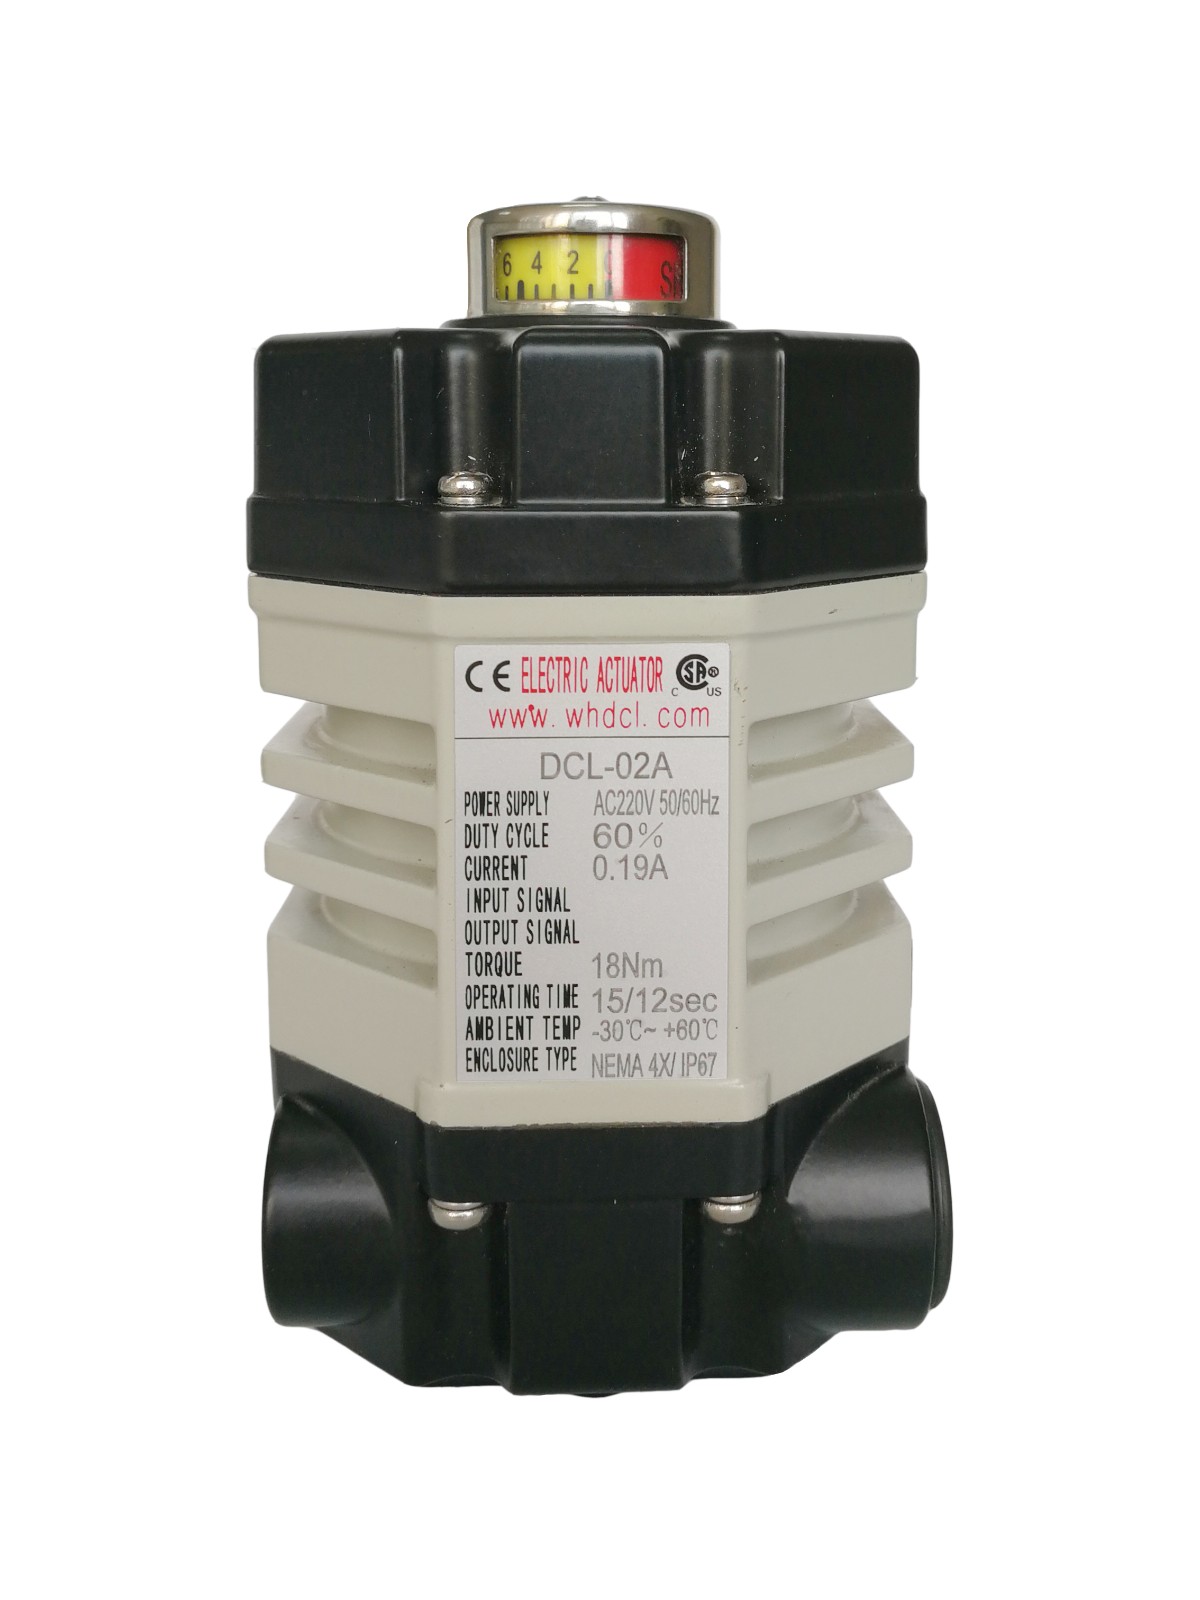 DCL-02 Electric actuator